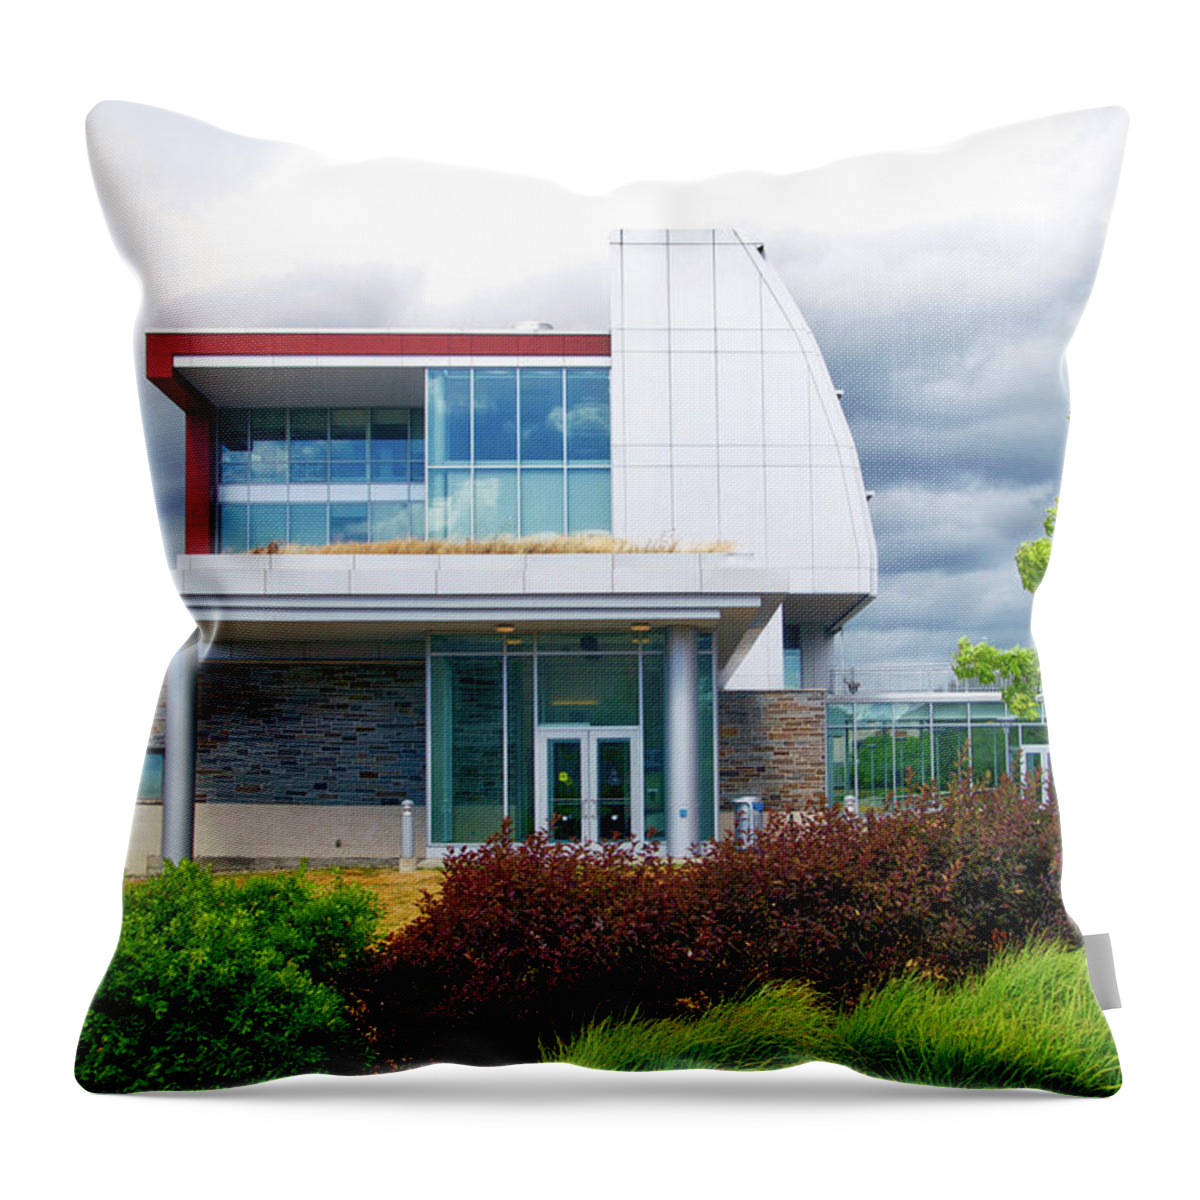 Ithaca College New York Throw Pillow featuring the photograph Architecture Ithaca College Ithaca New York 02 by Thomas Woolworth